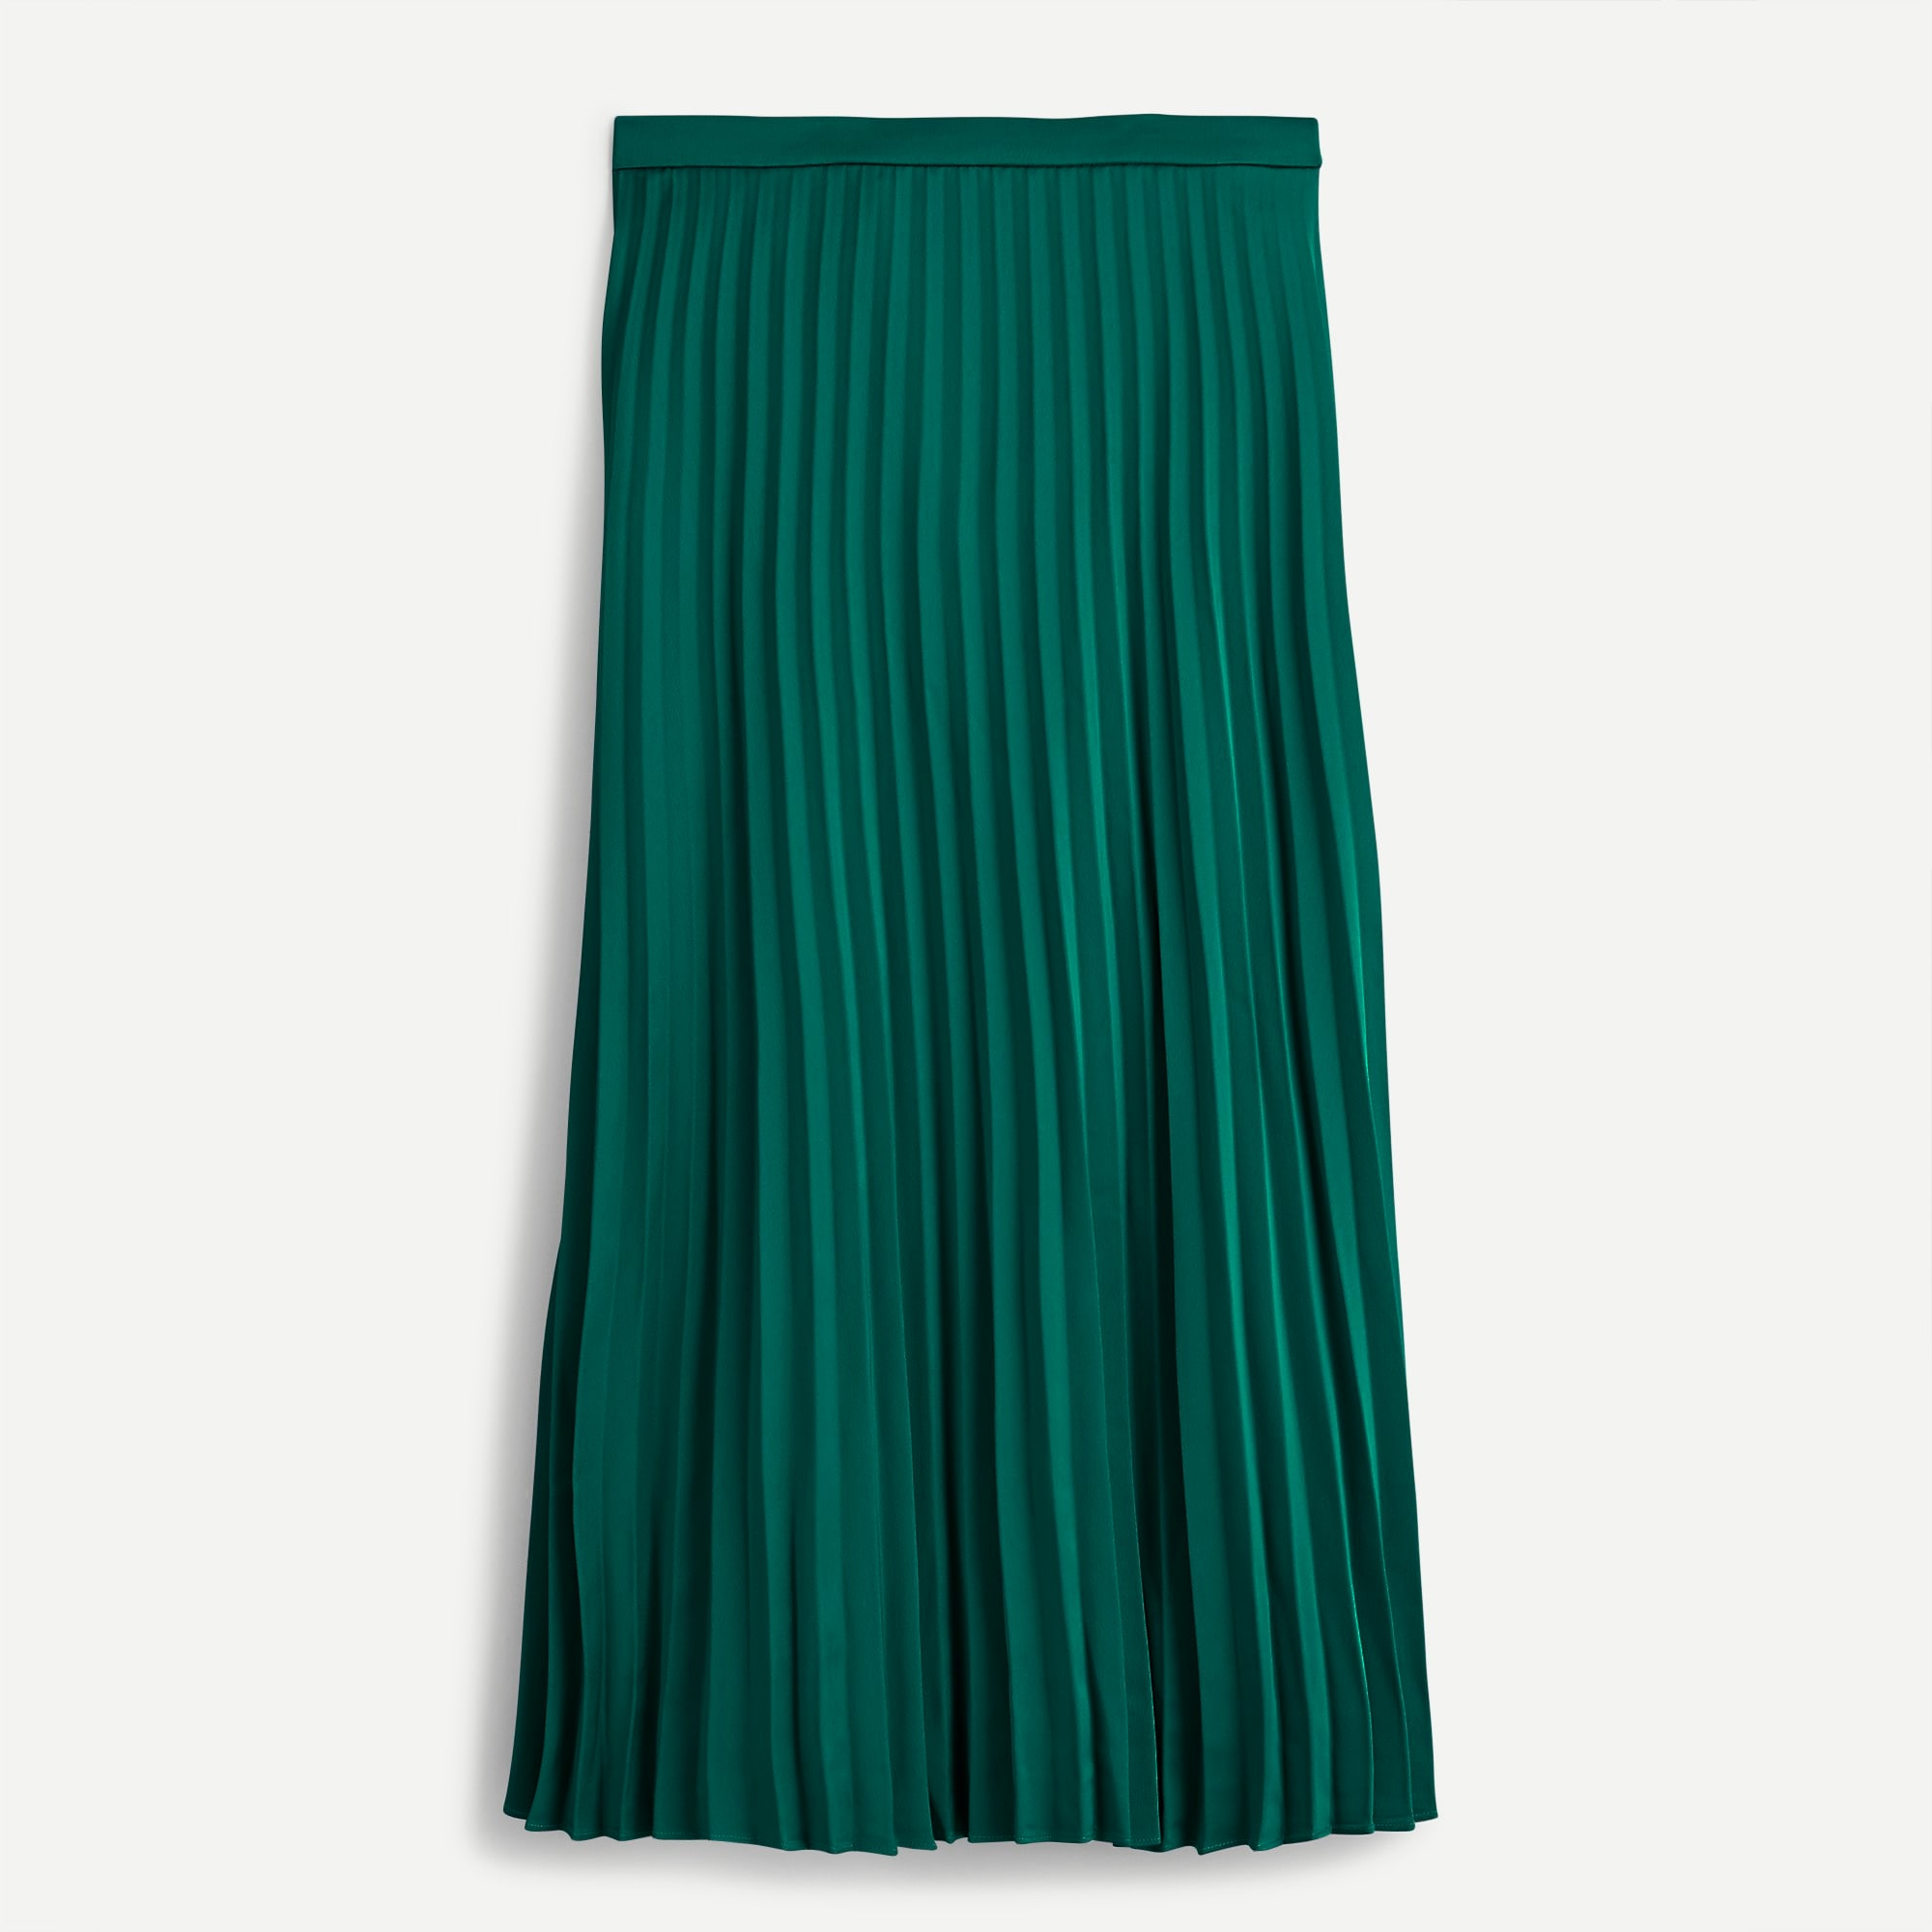 with 100% quality and %100 service size Crew J. Ladies 00 skirt pleated ...